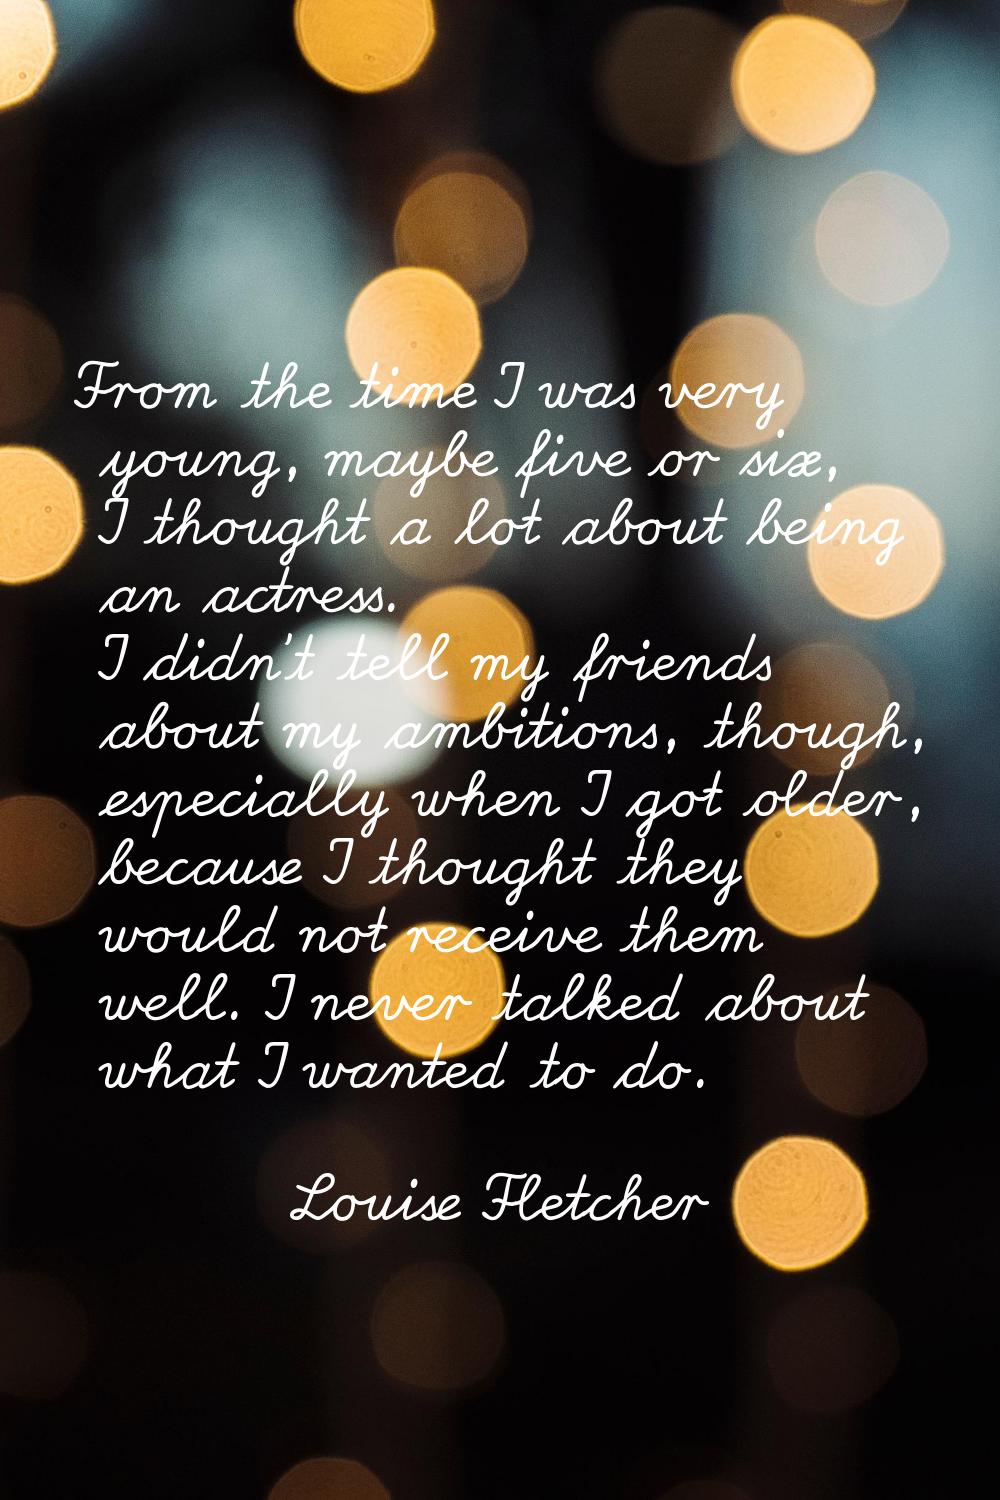 From the time I was very young, maybe five or six, I thought a lot about being an actress. I didn't